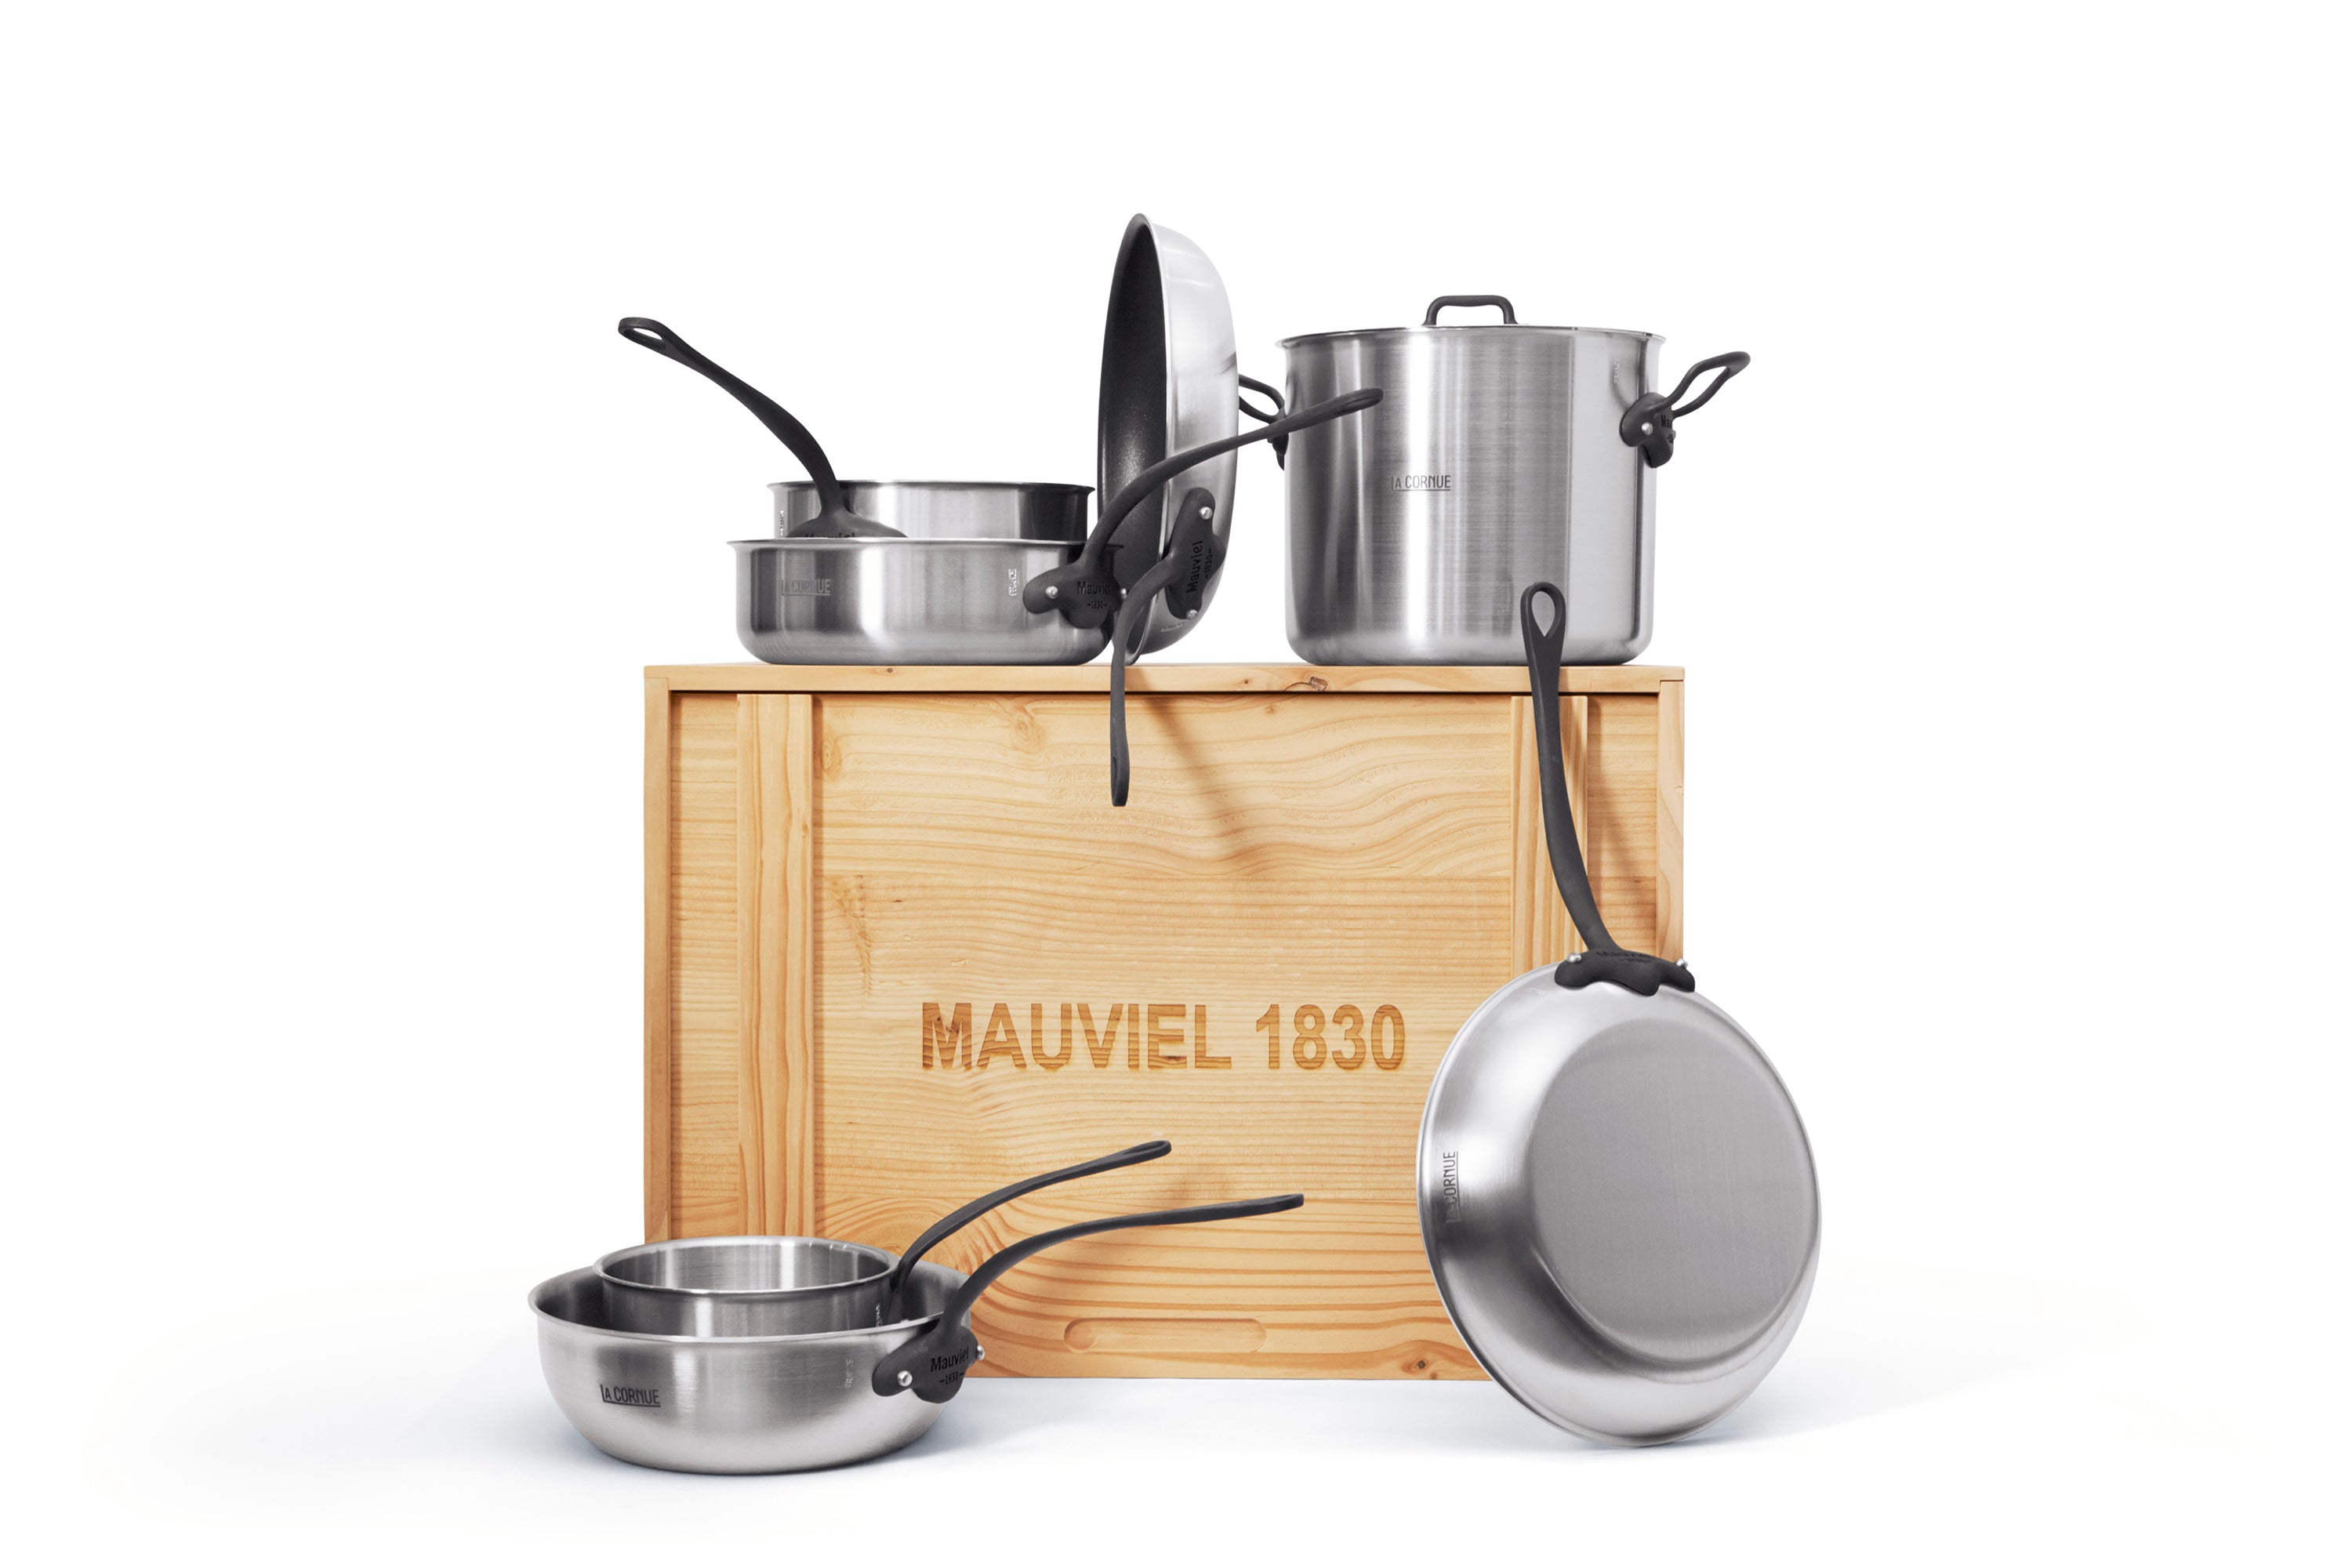 Mauviel1830 collection